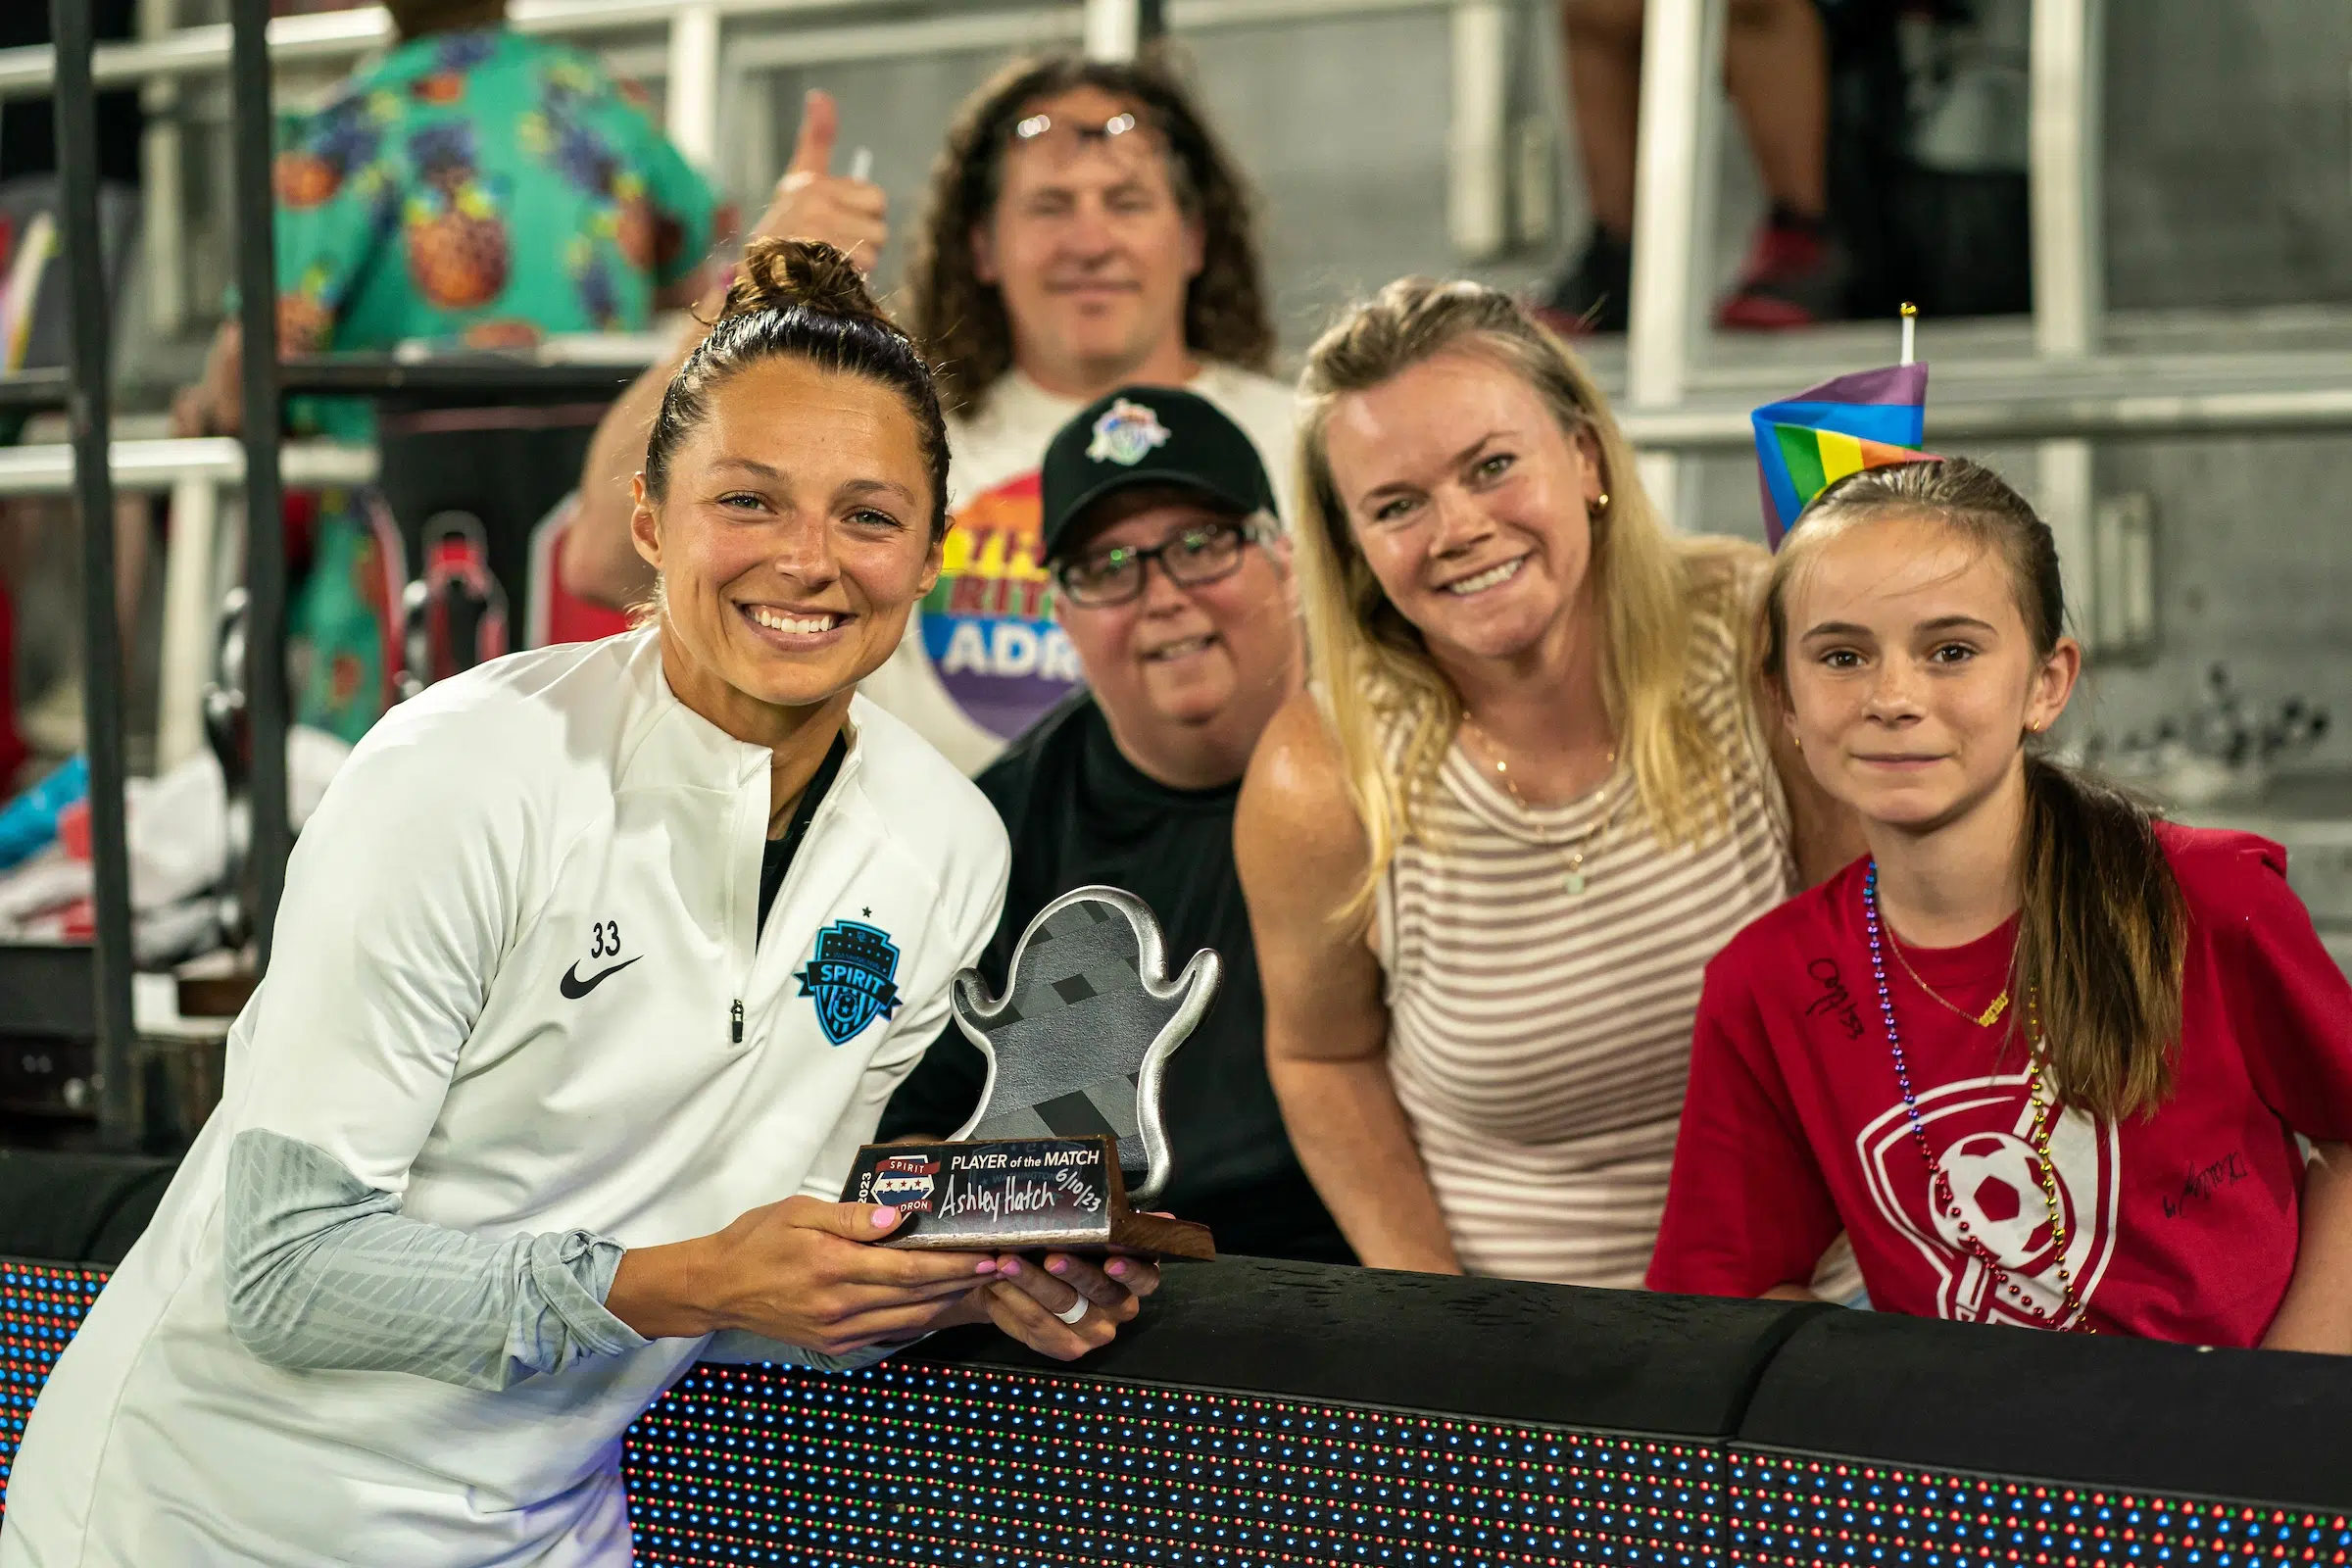 Ashley Hatch in a white quarter zip top holds a ghost-emoji shaped trophy and poses for a photo with a young fan.